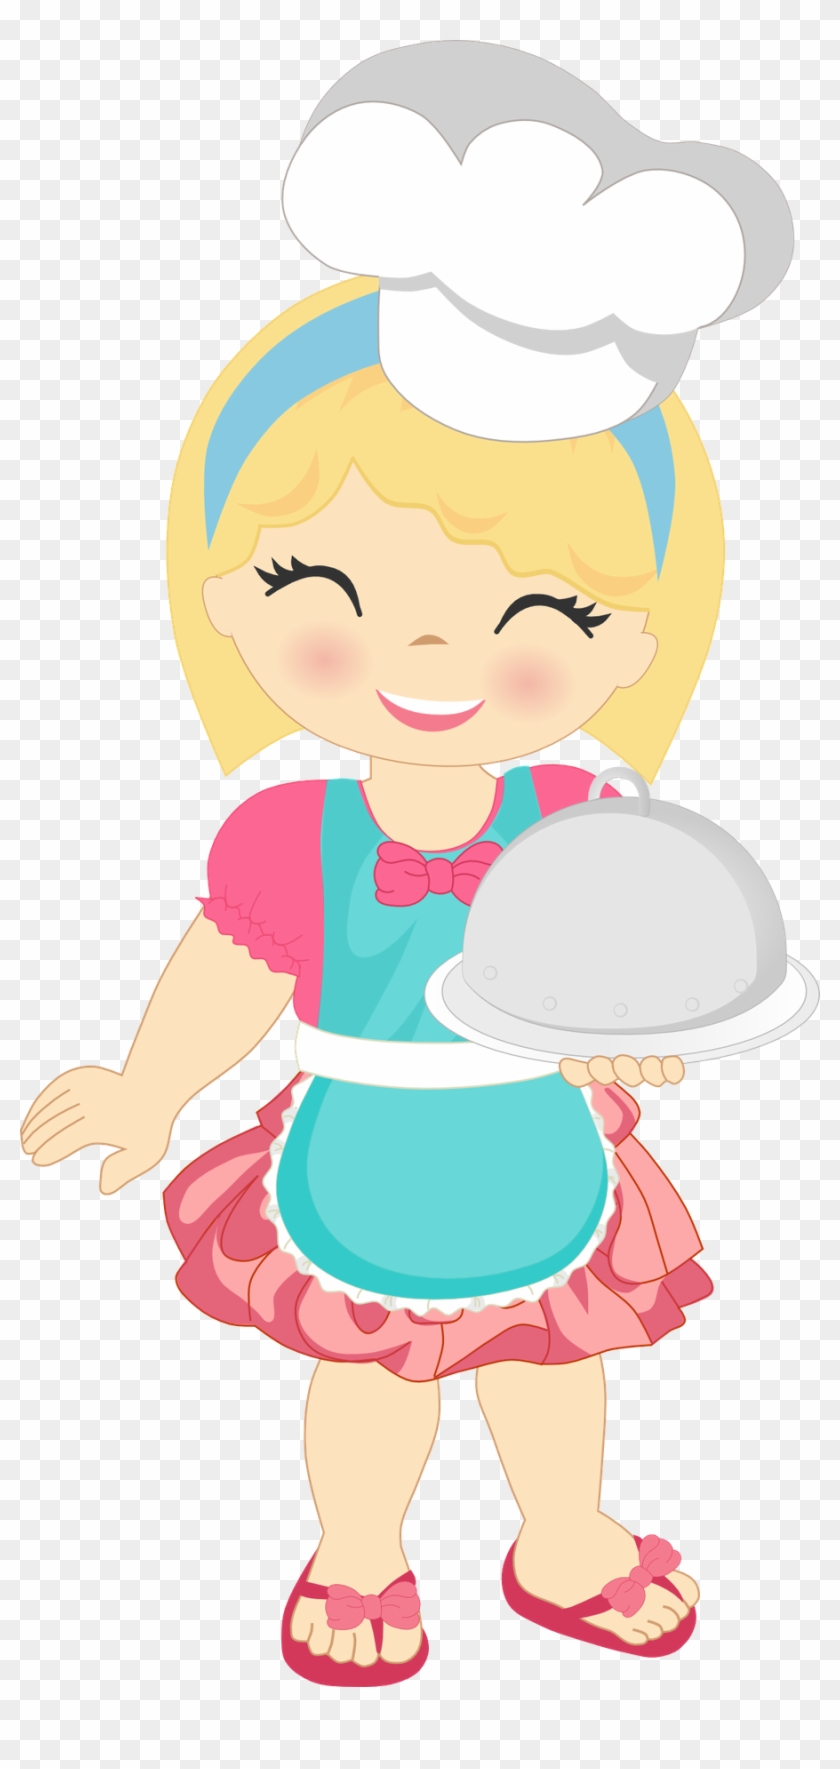 Chef Animado, Cooking Clipart, Food Clipart, Cute Clipart.